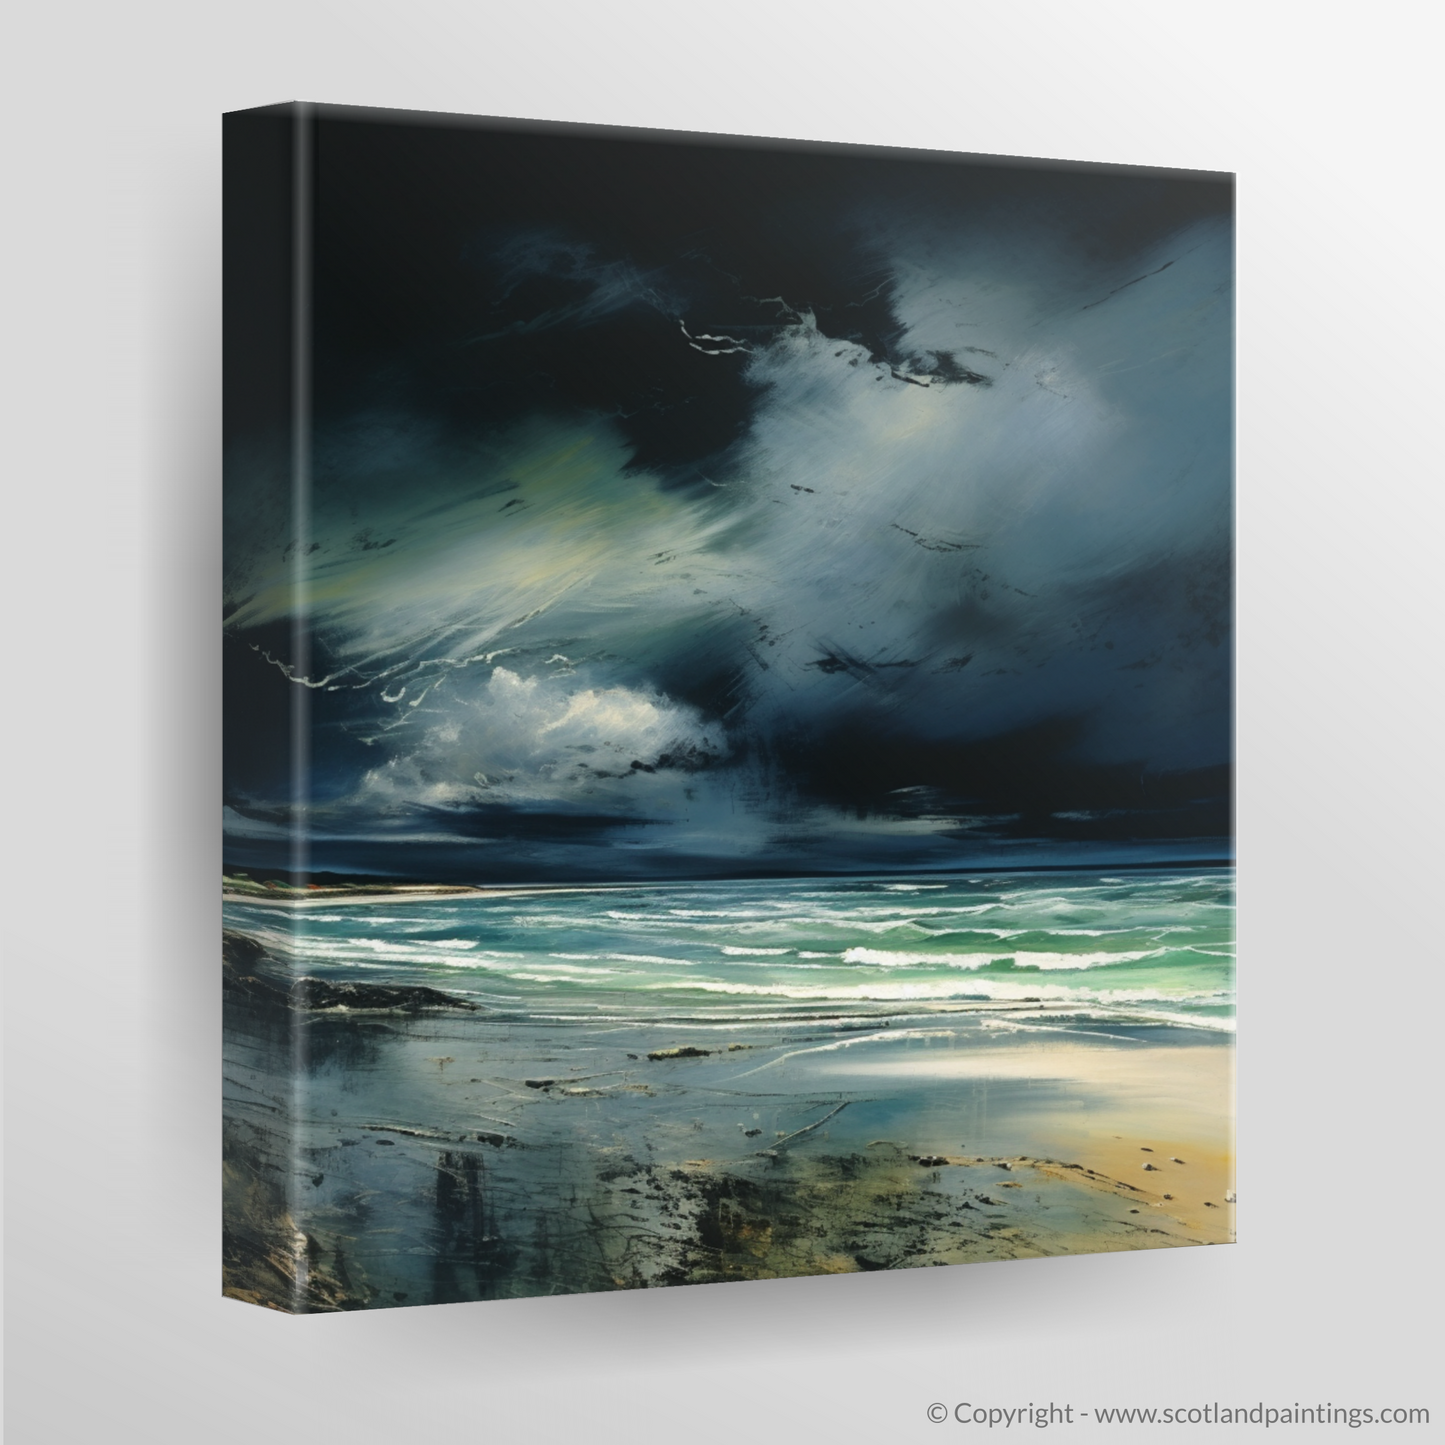 Storm's Embrace: A Surrealistic Vision of Nairn Beach